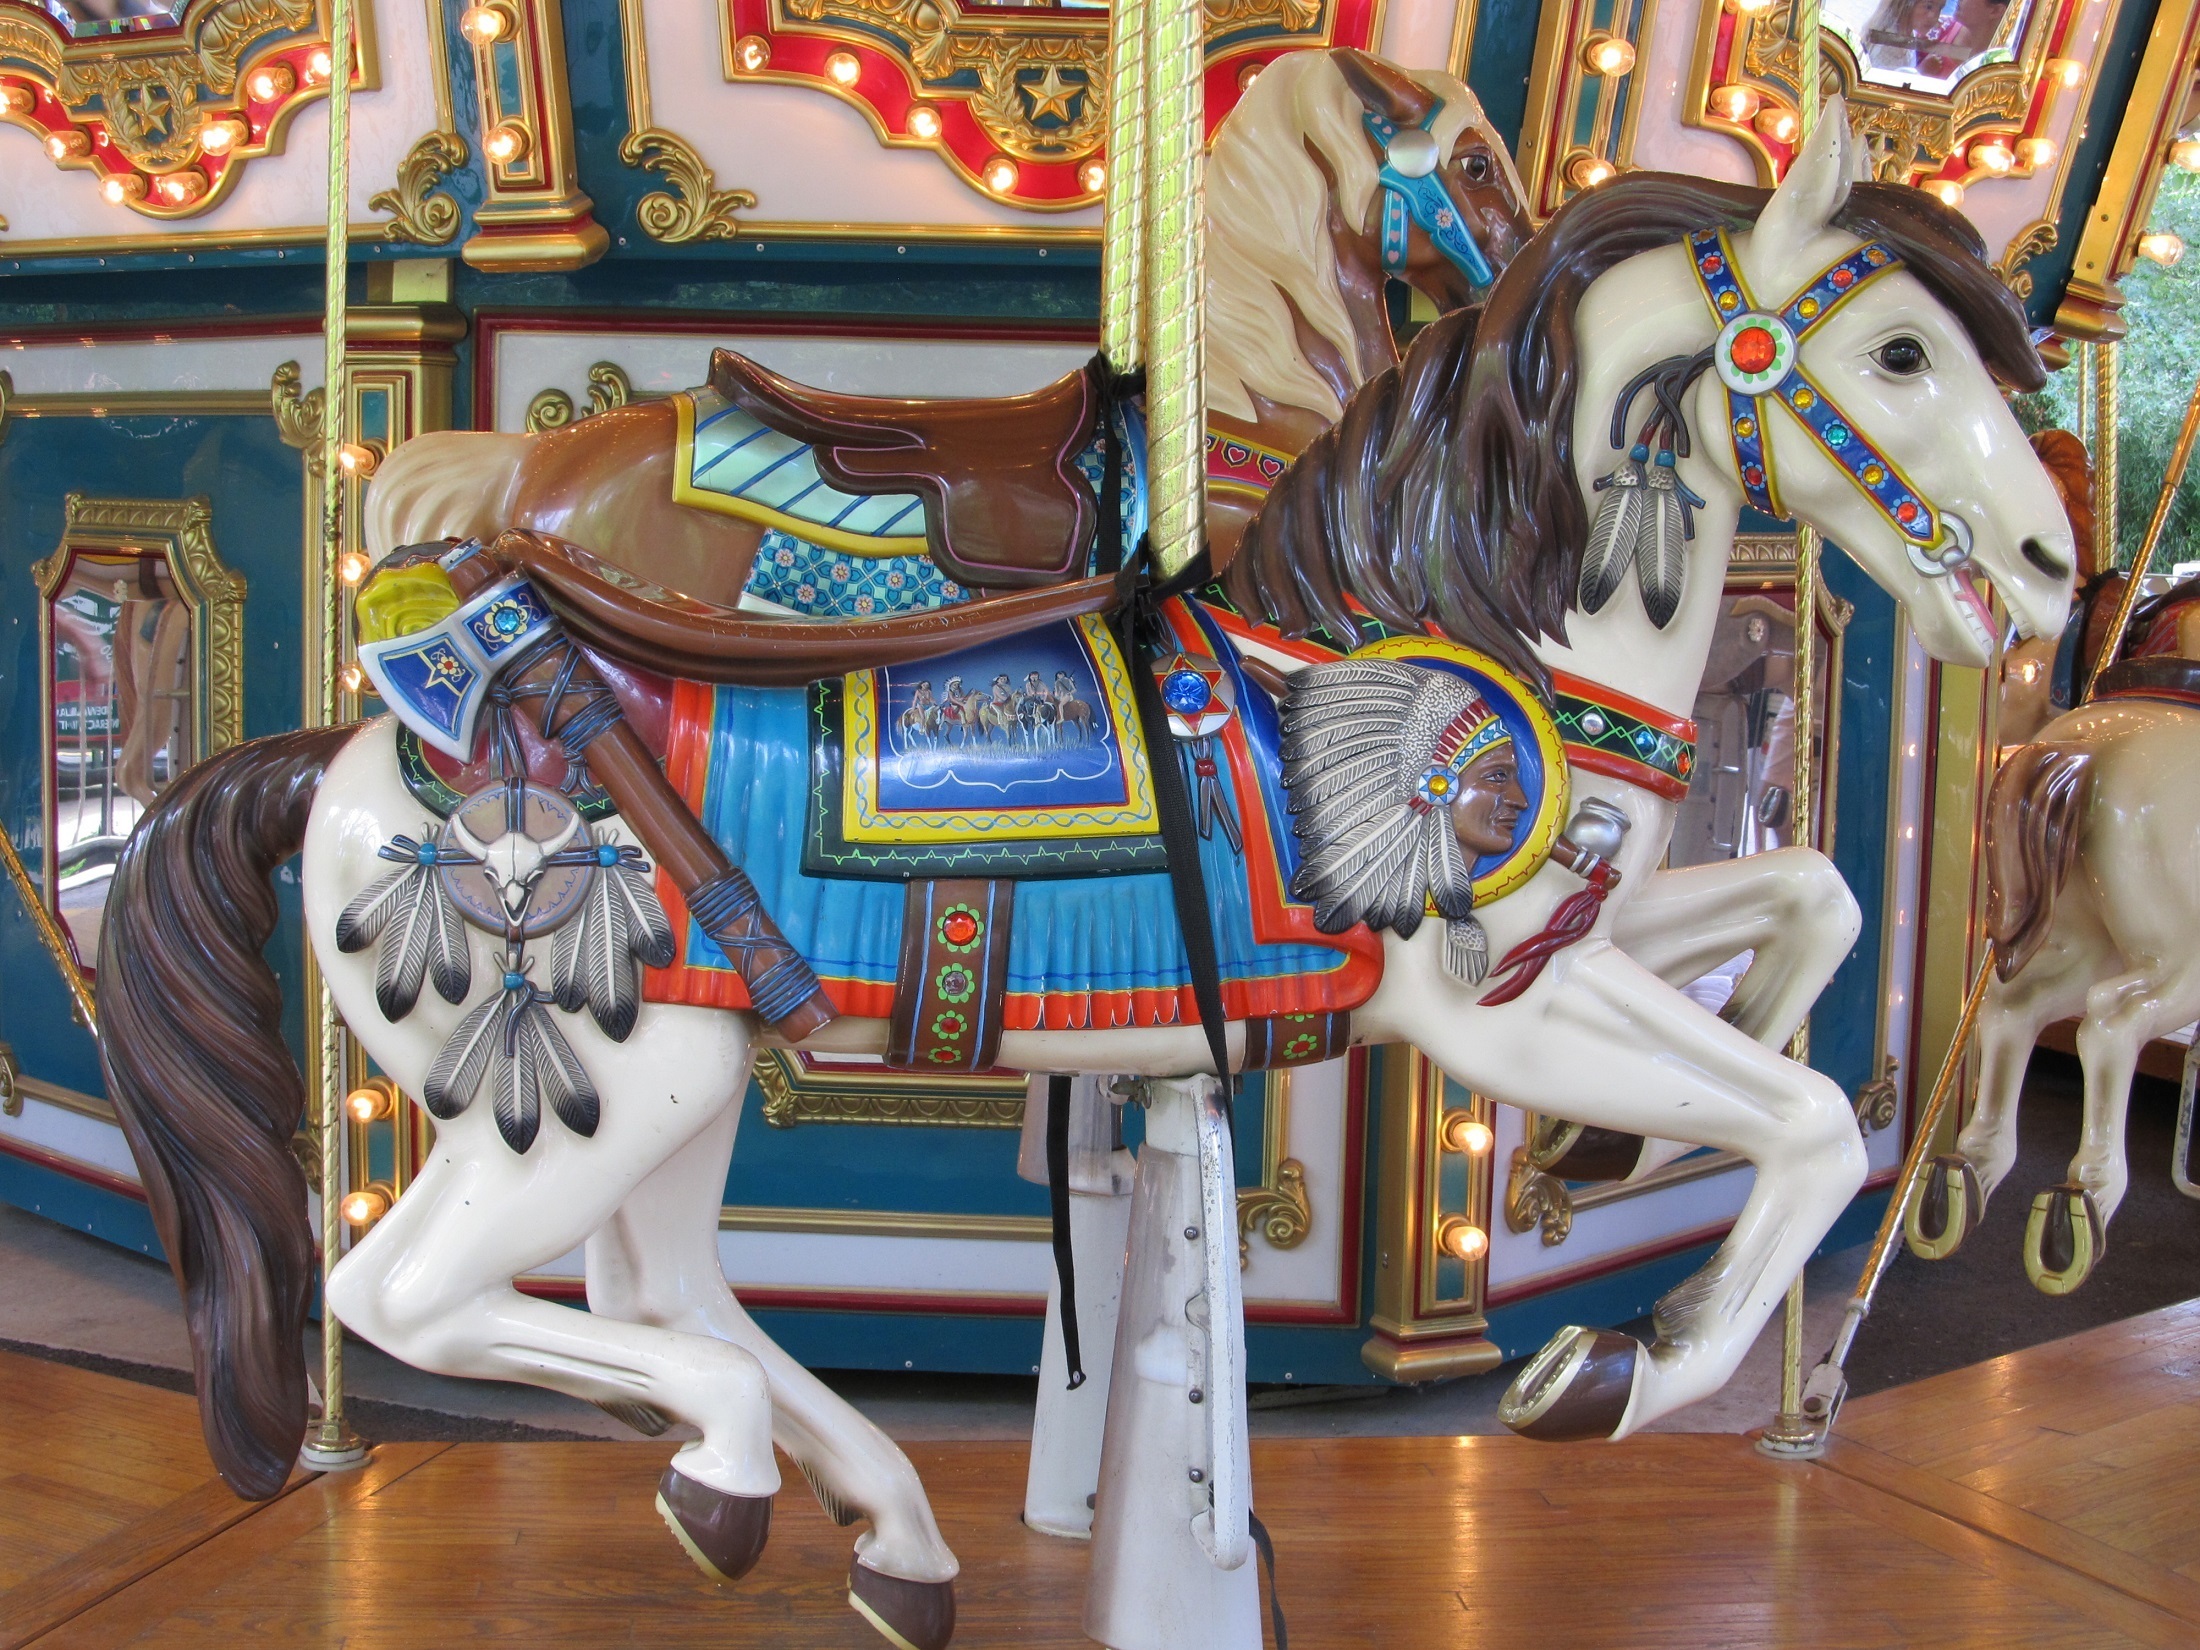 Native American Indian Painted Merry Go Round by skeeze